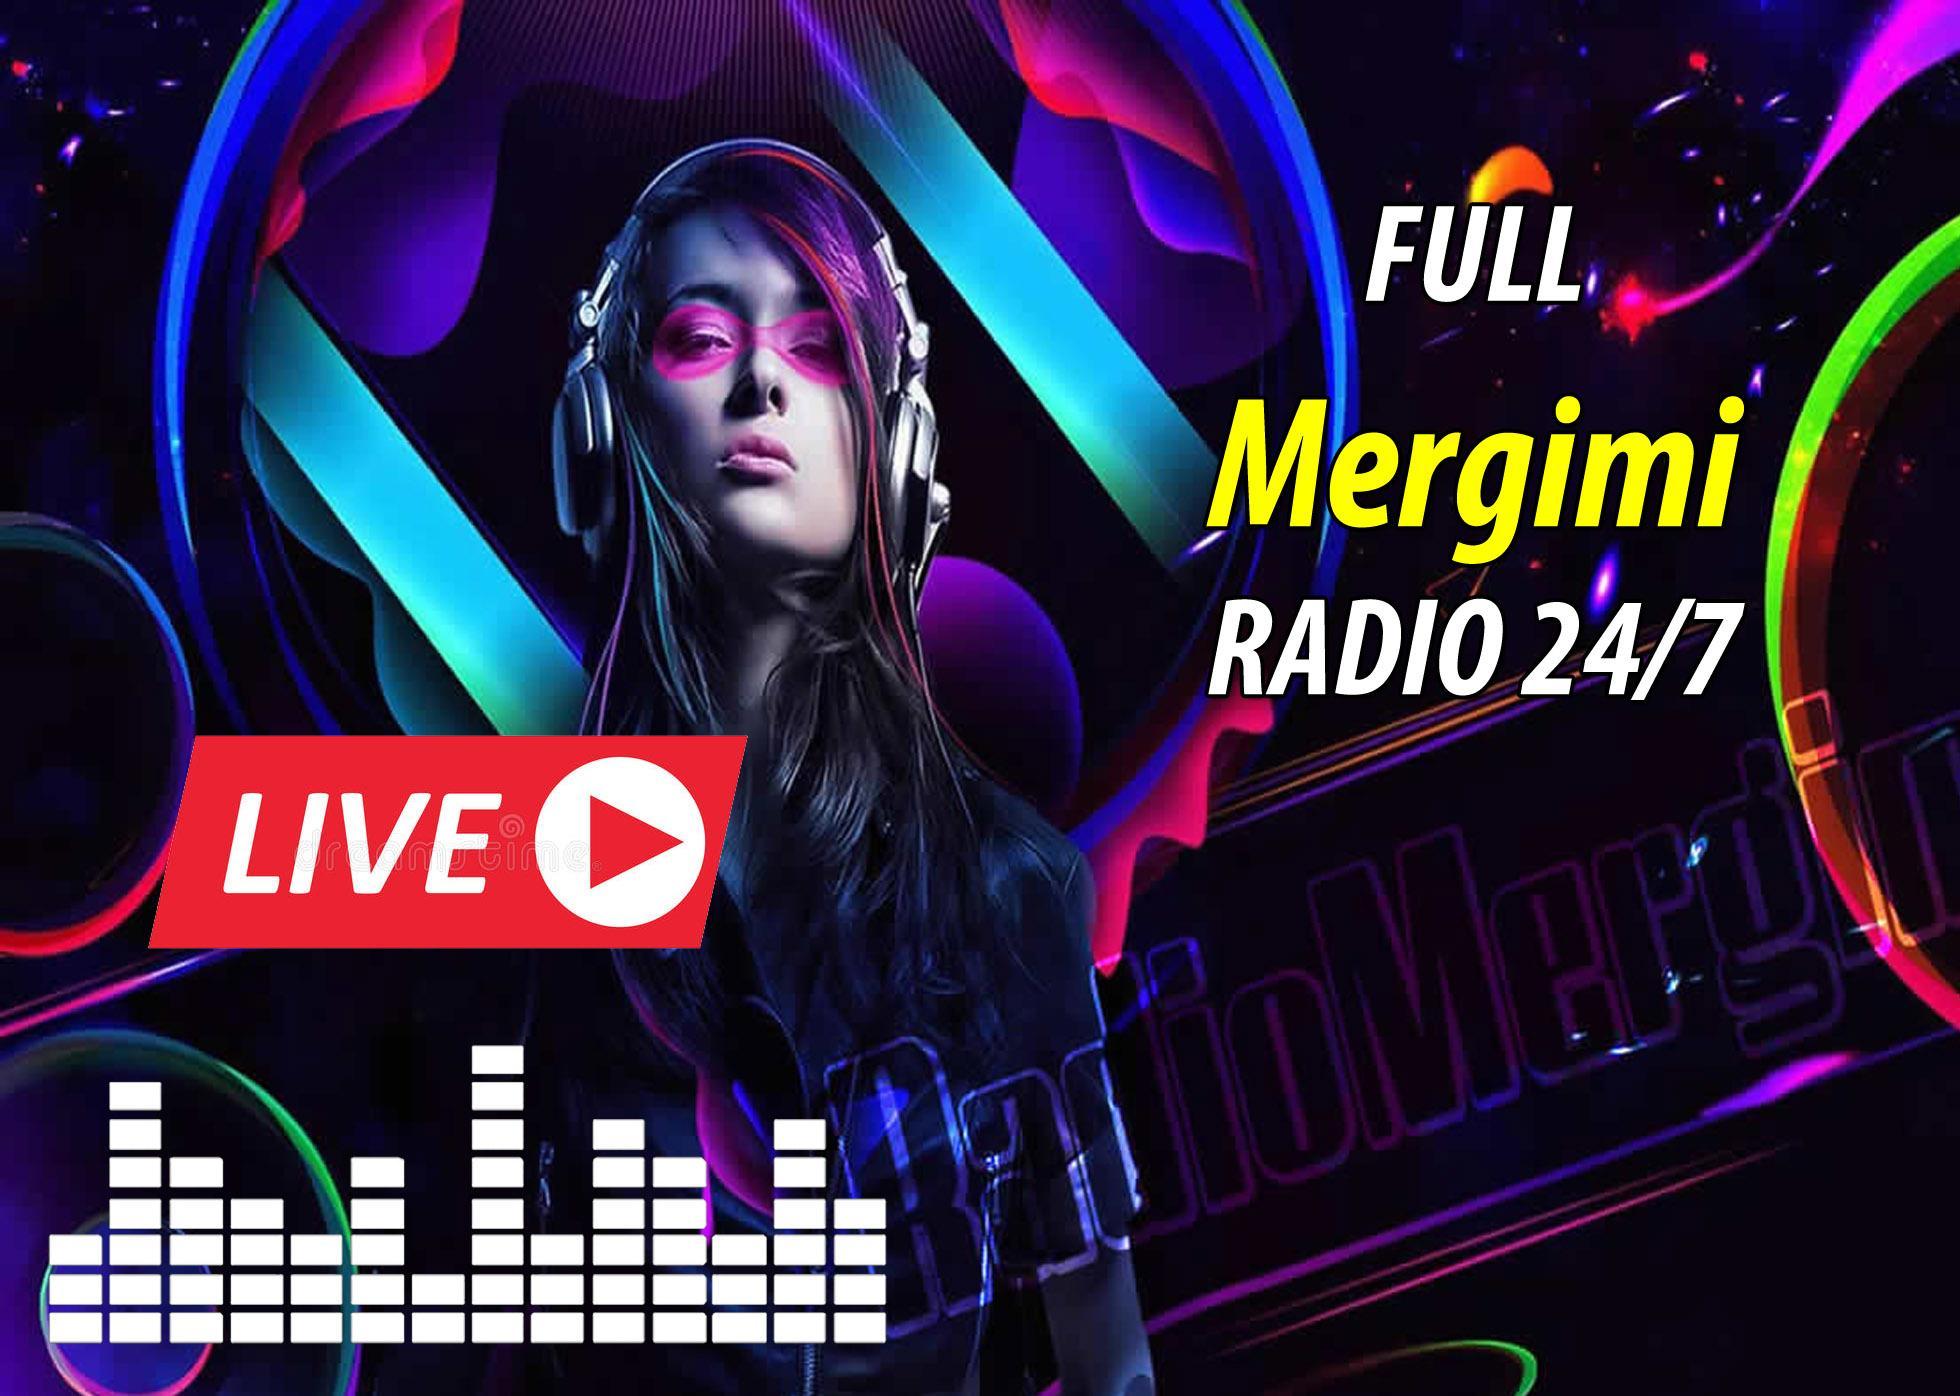 Radio Mergimi 24/7 Online for Android - APK Download